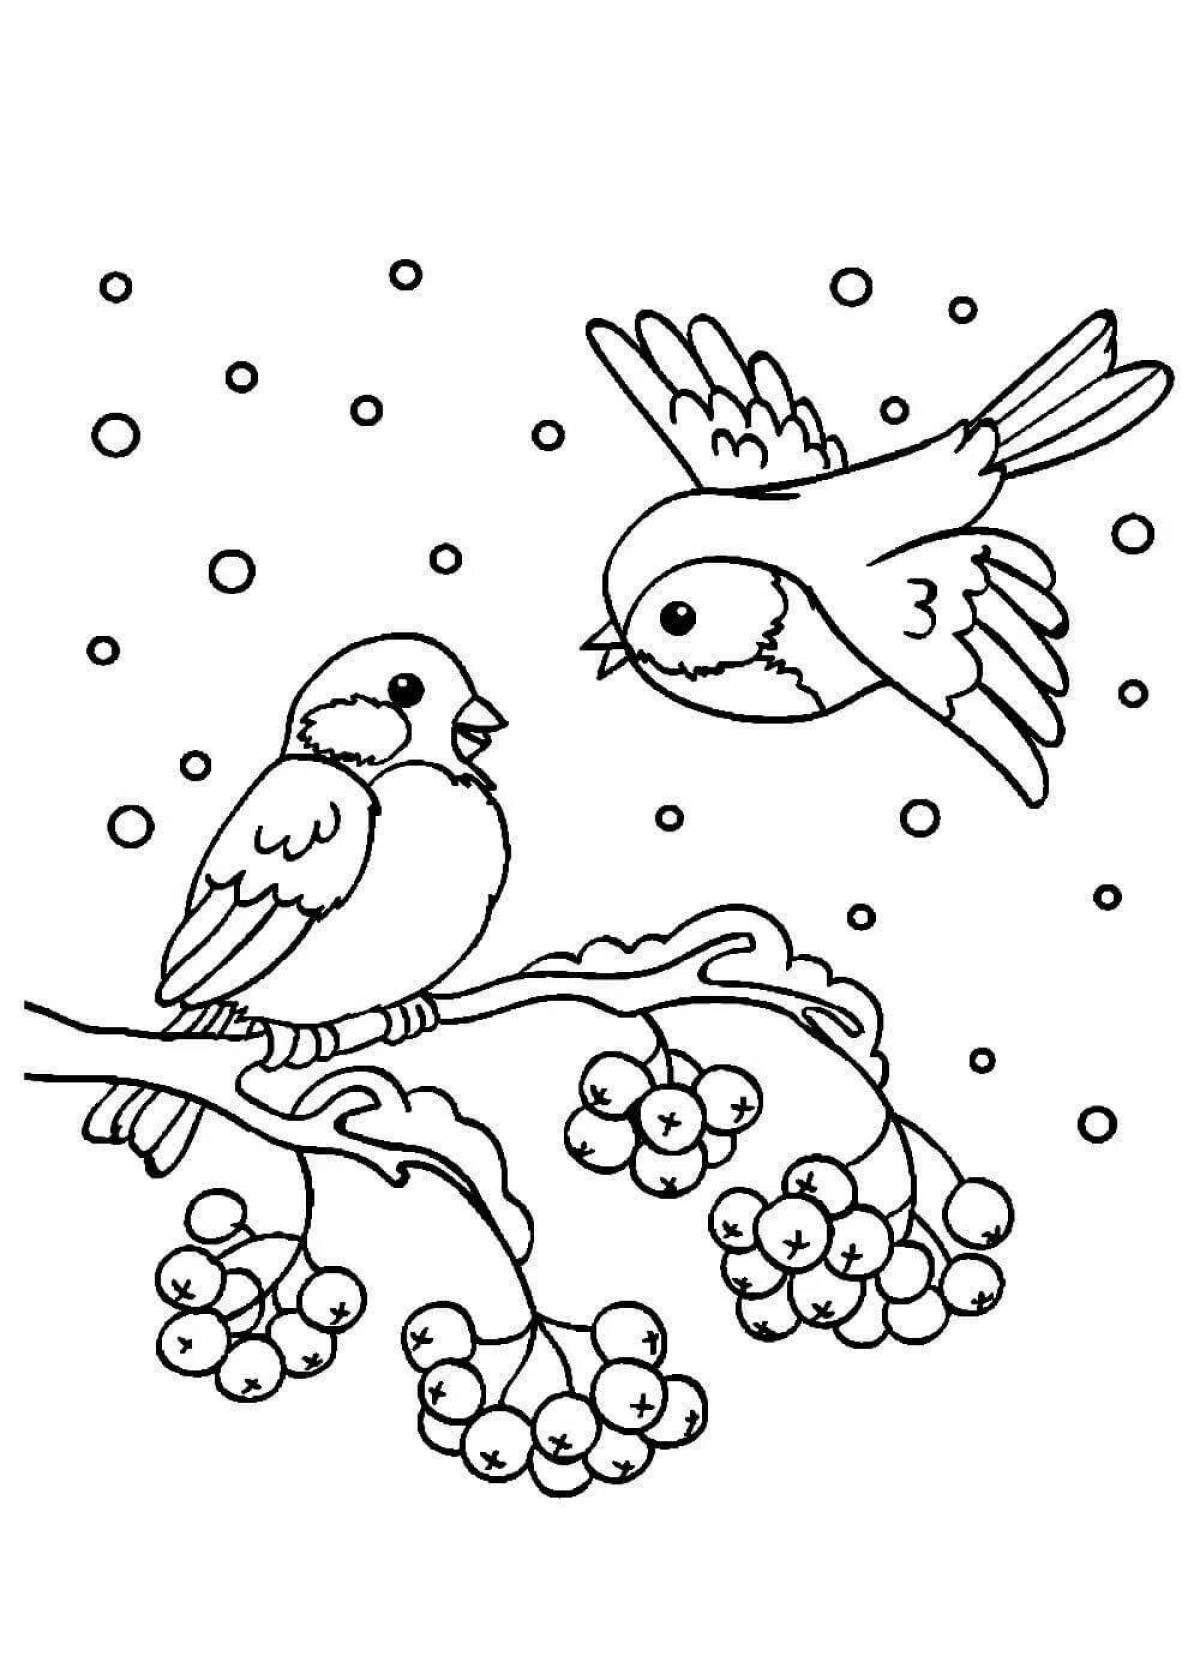 Happy titmouse day coloring page